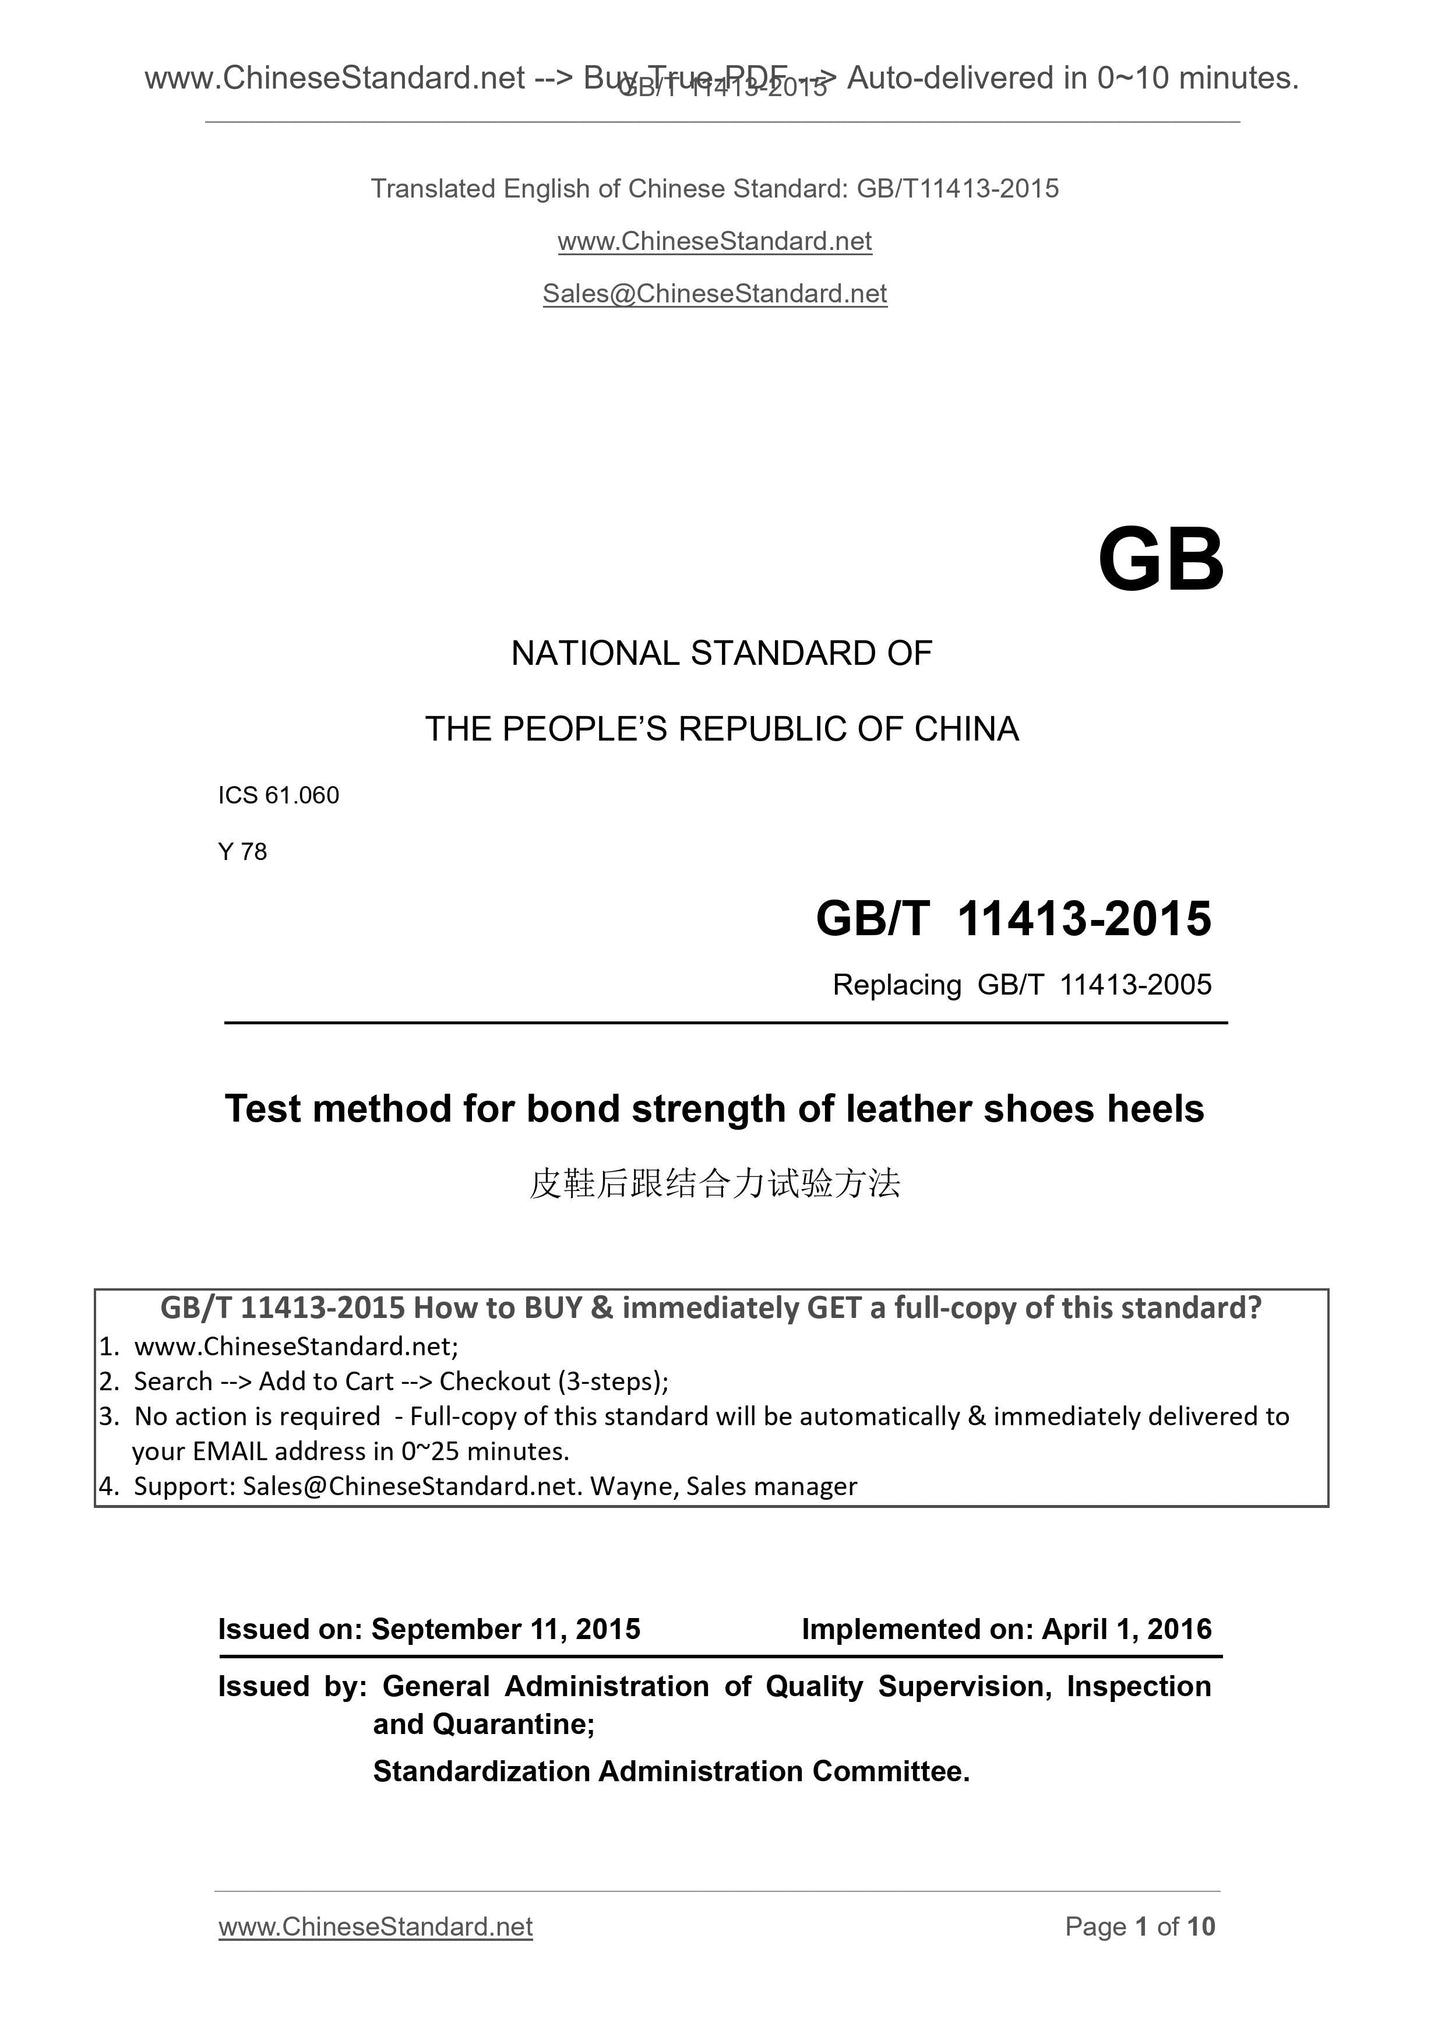 GB/T 11413-2015 Page 1